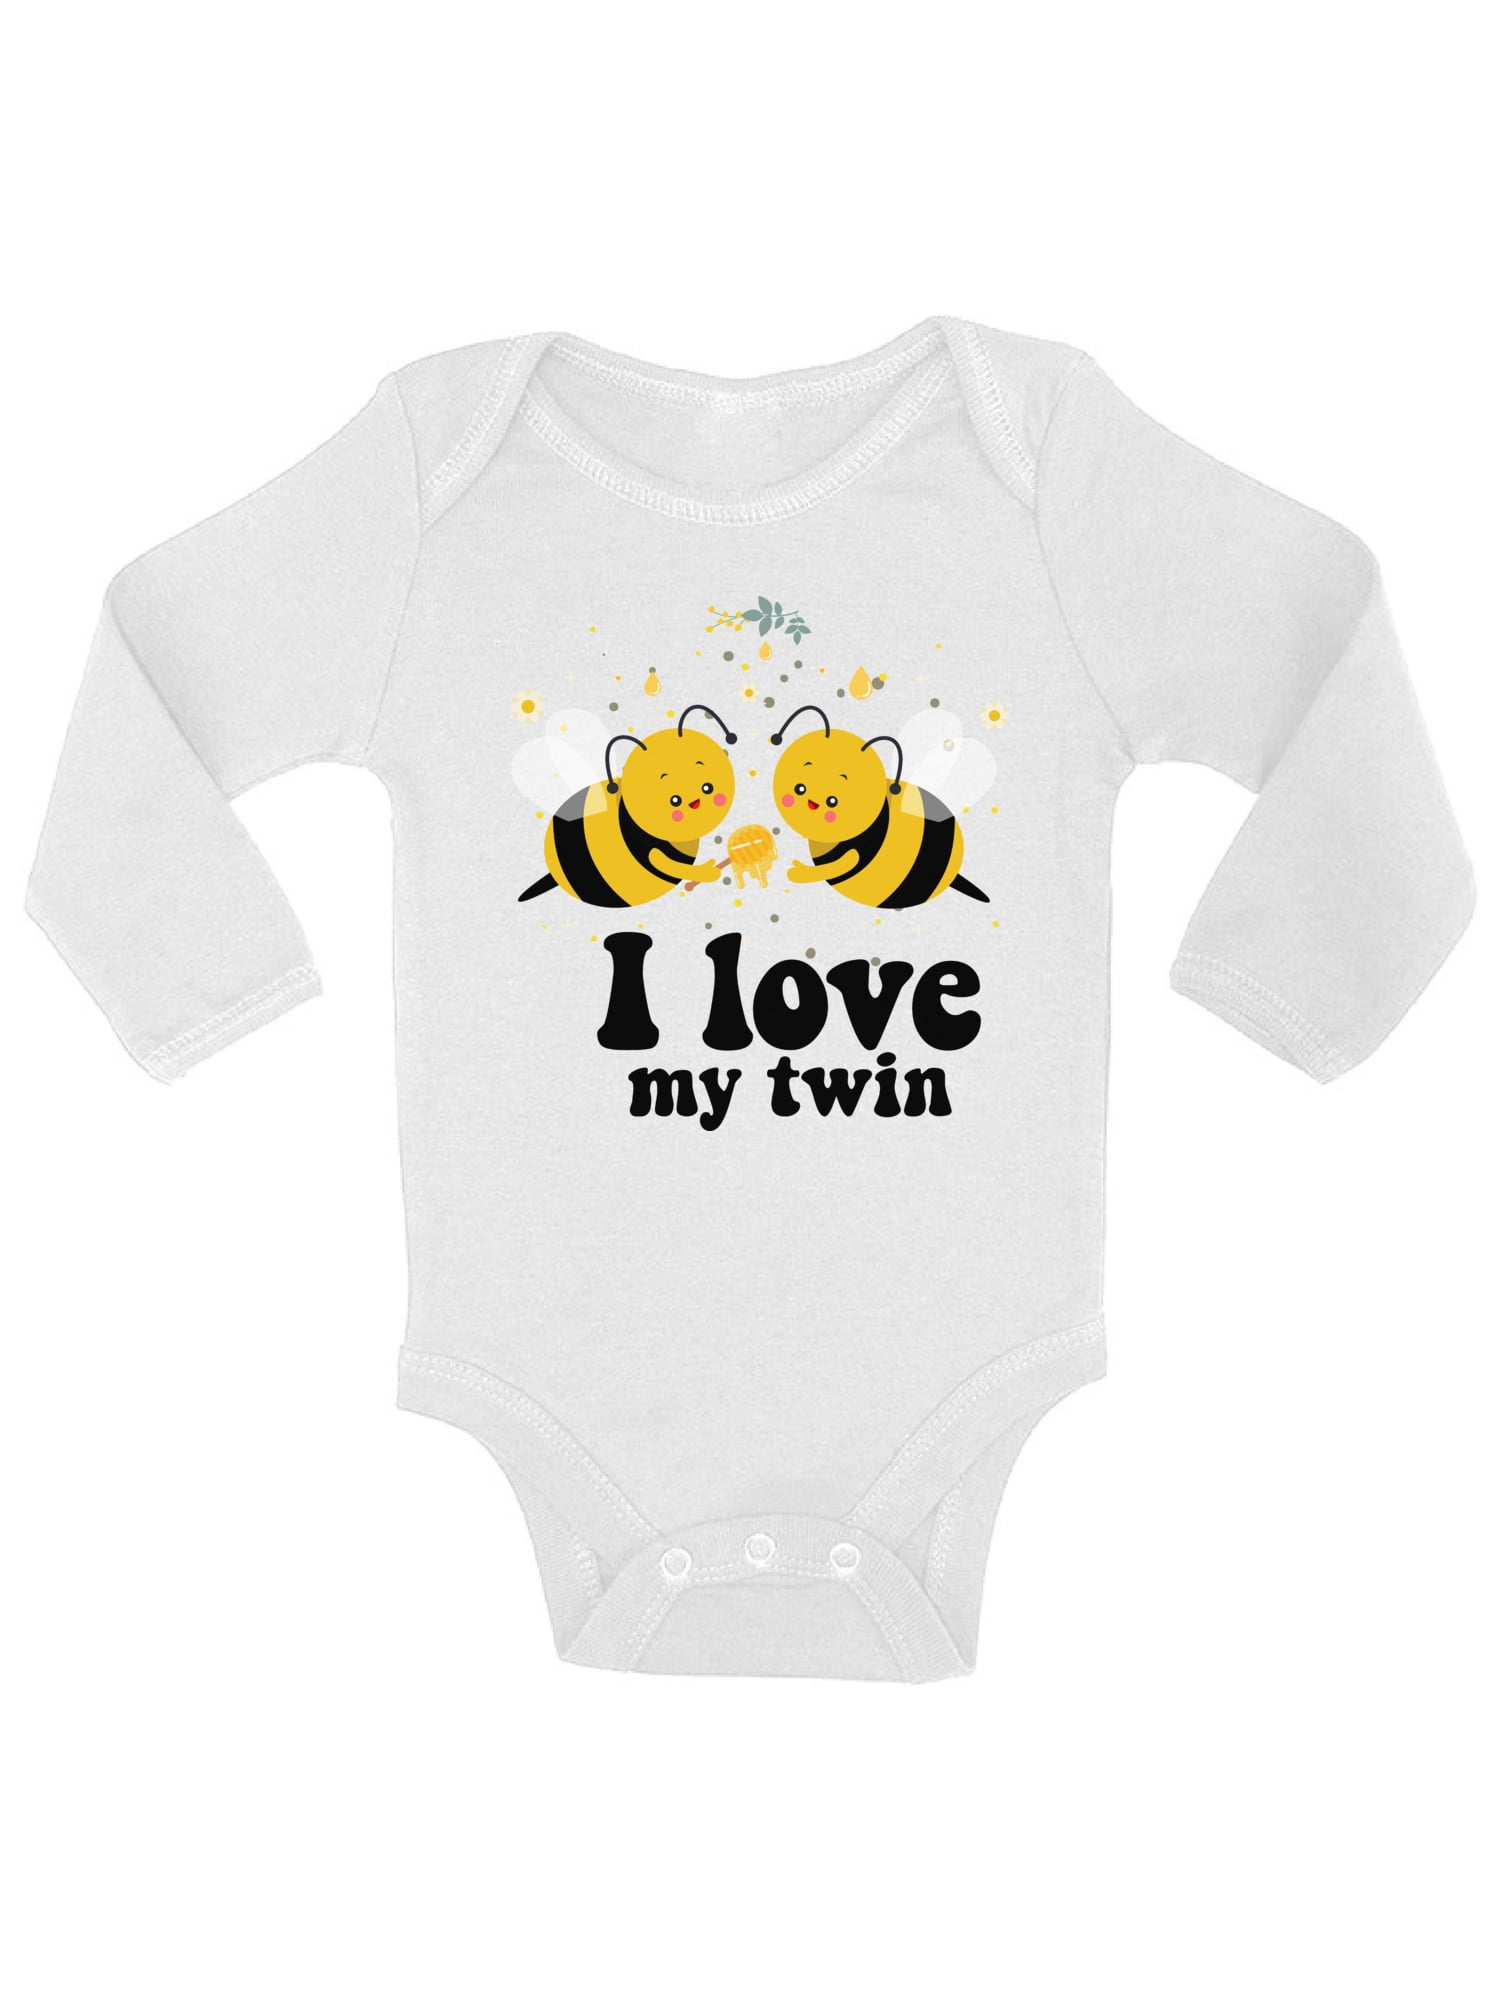 Ladies we have arrived Novelty Twins Baby Vests Babygrow Baby Twin Gifts Set